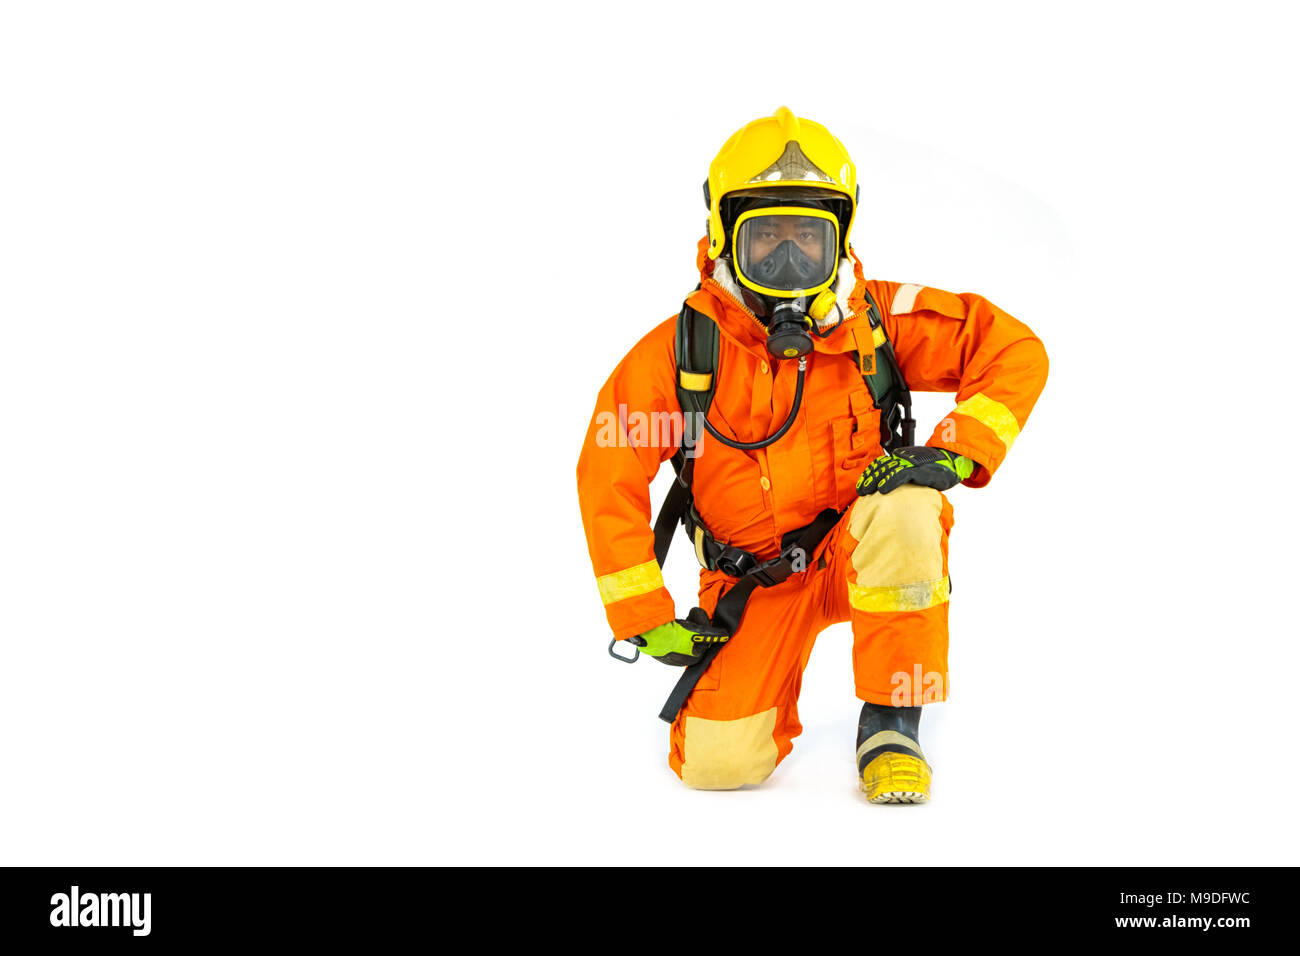 Firefighter in uniform and safety helmet standing full body length Stock Photo